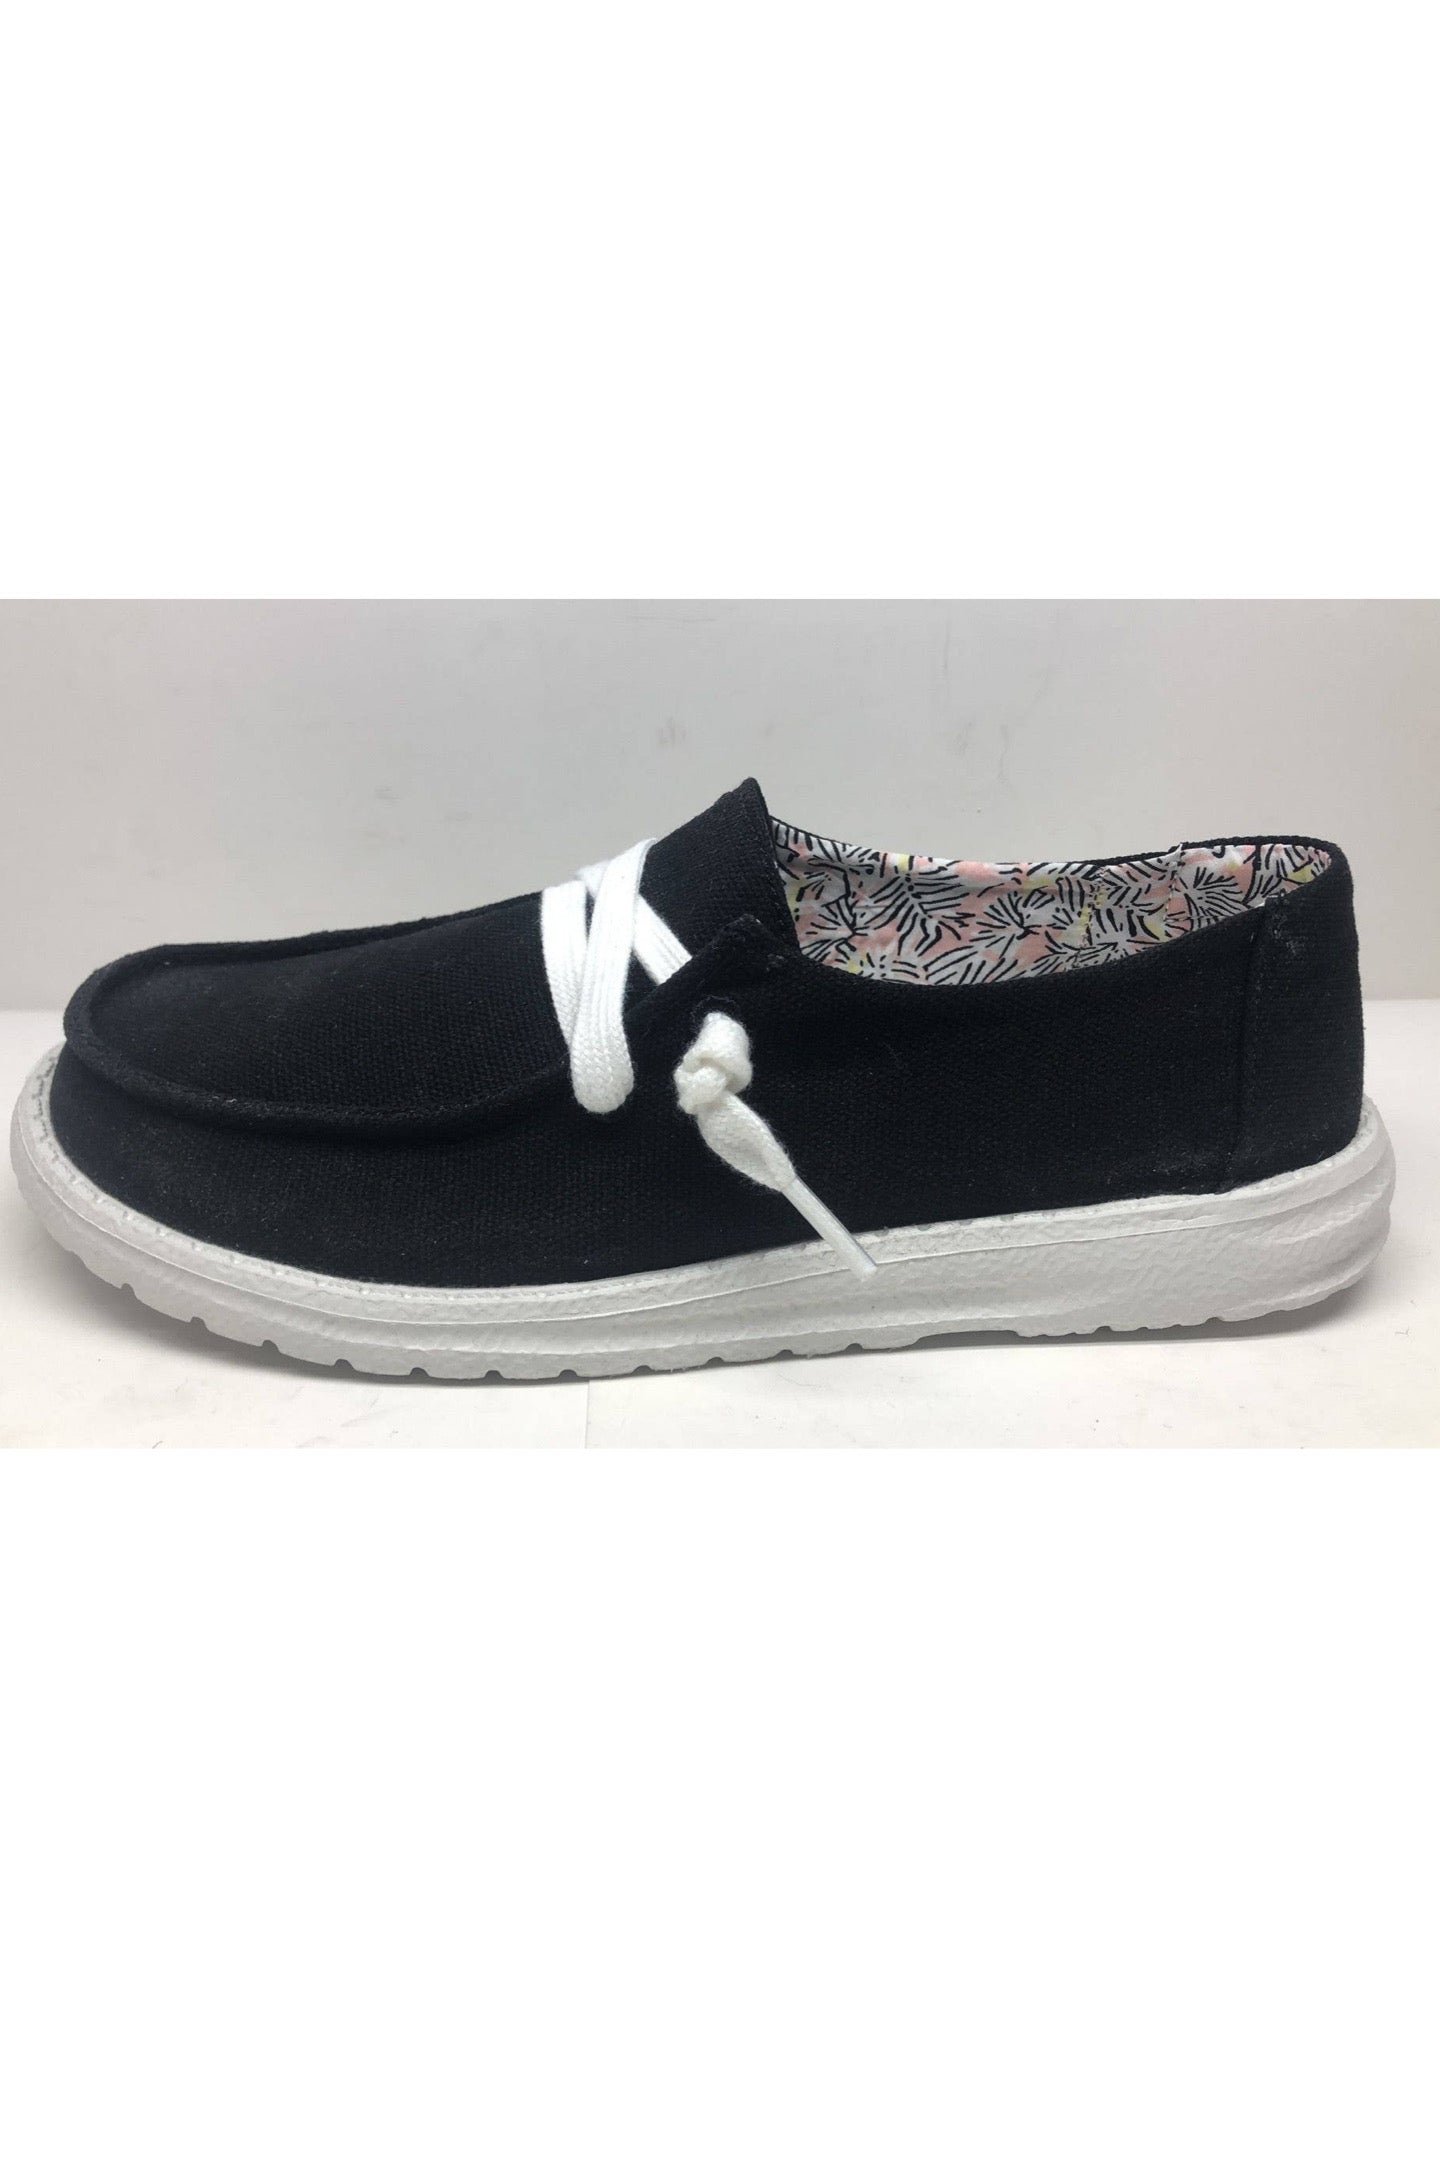 Holly~Black Canvas Slip-on Sneakers by Gypsy Jazz